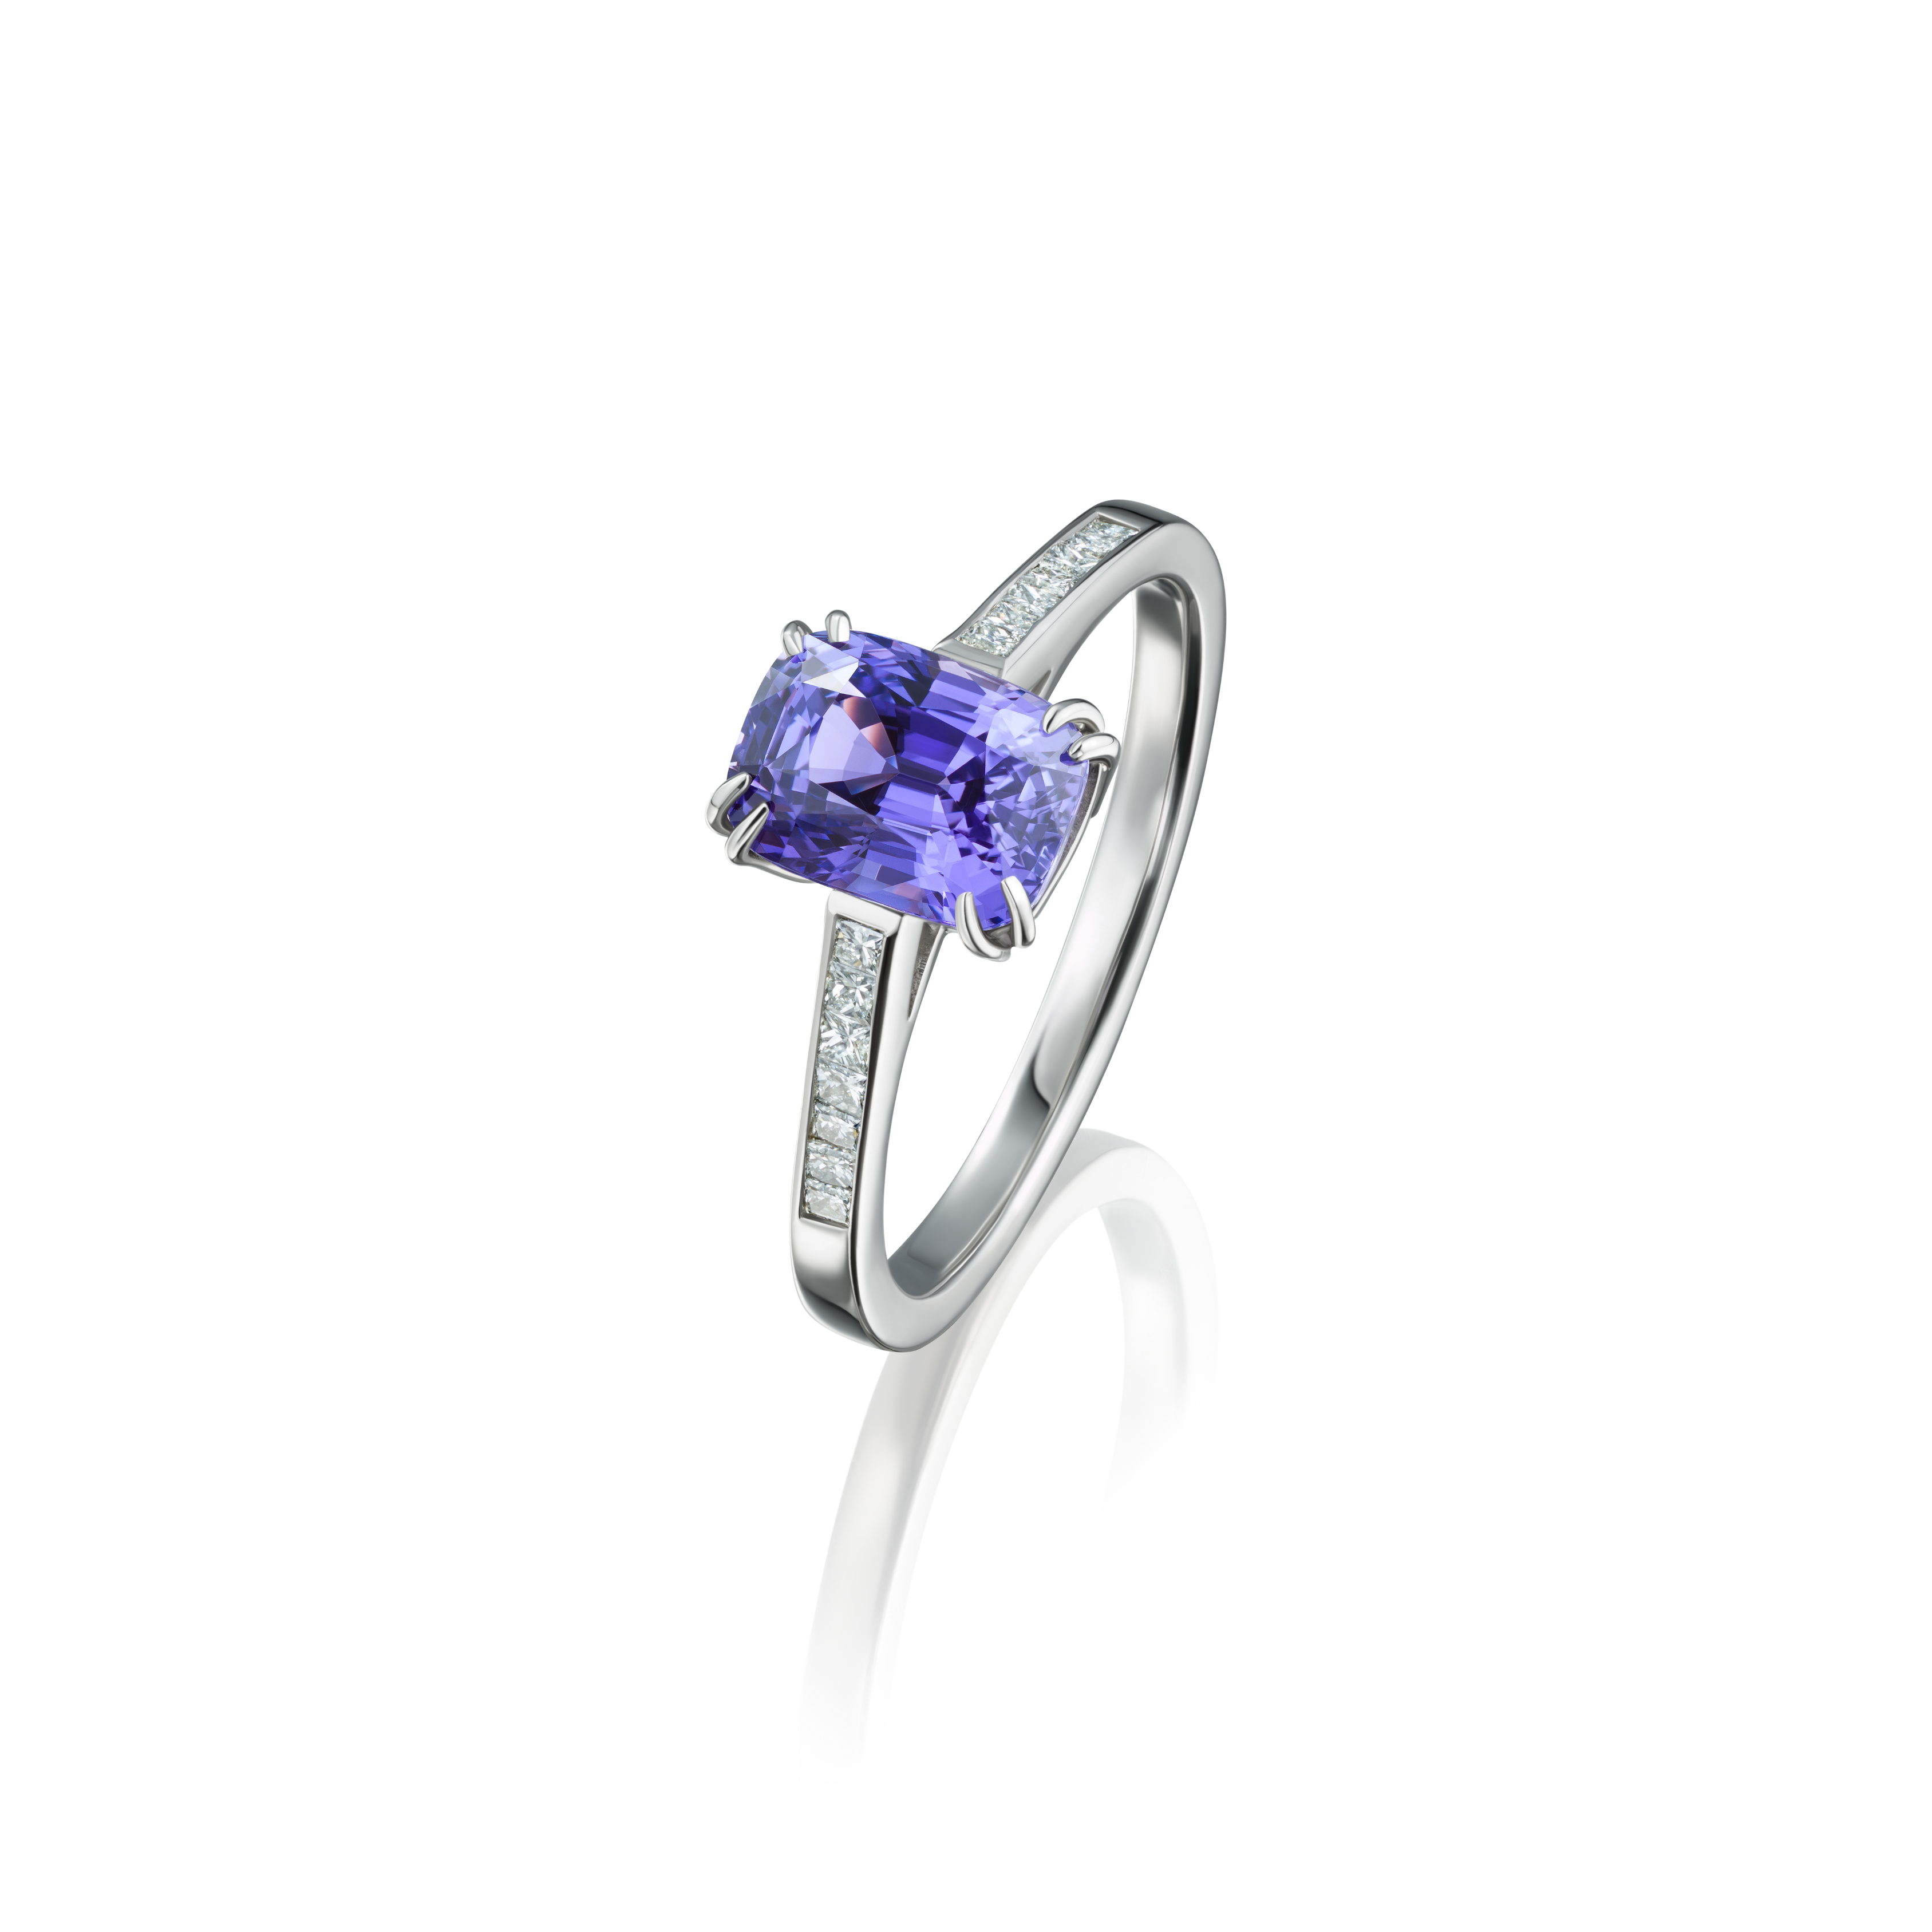 Natural Colour Change Sapphire Ring With Diamond Set Shoulders